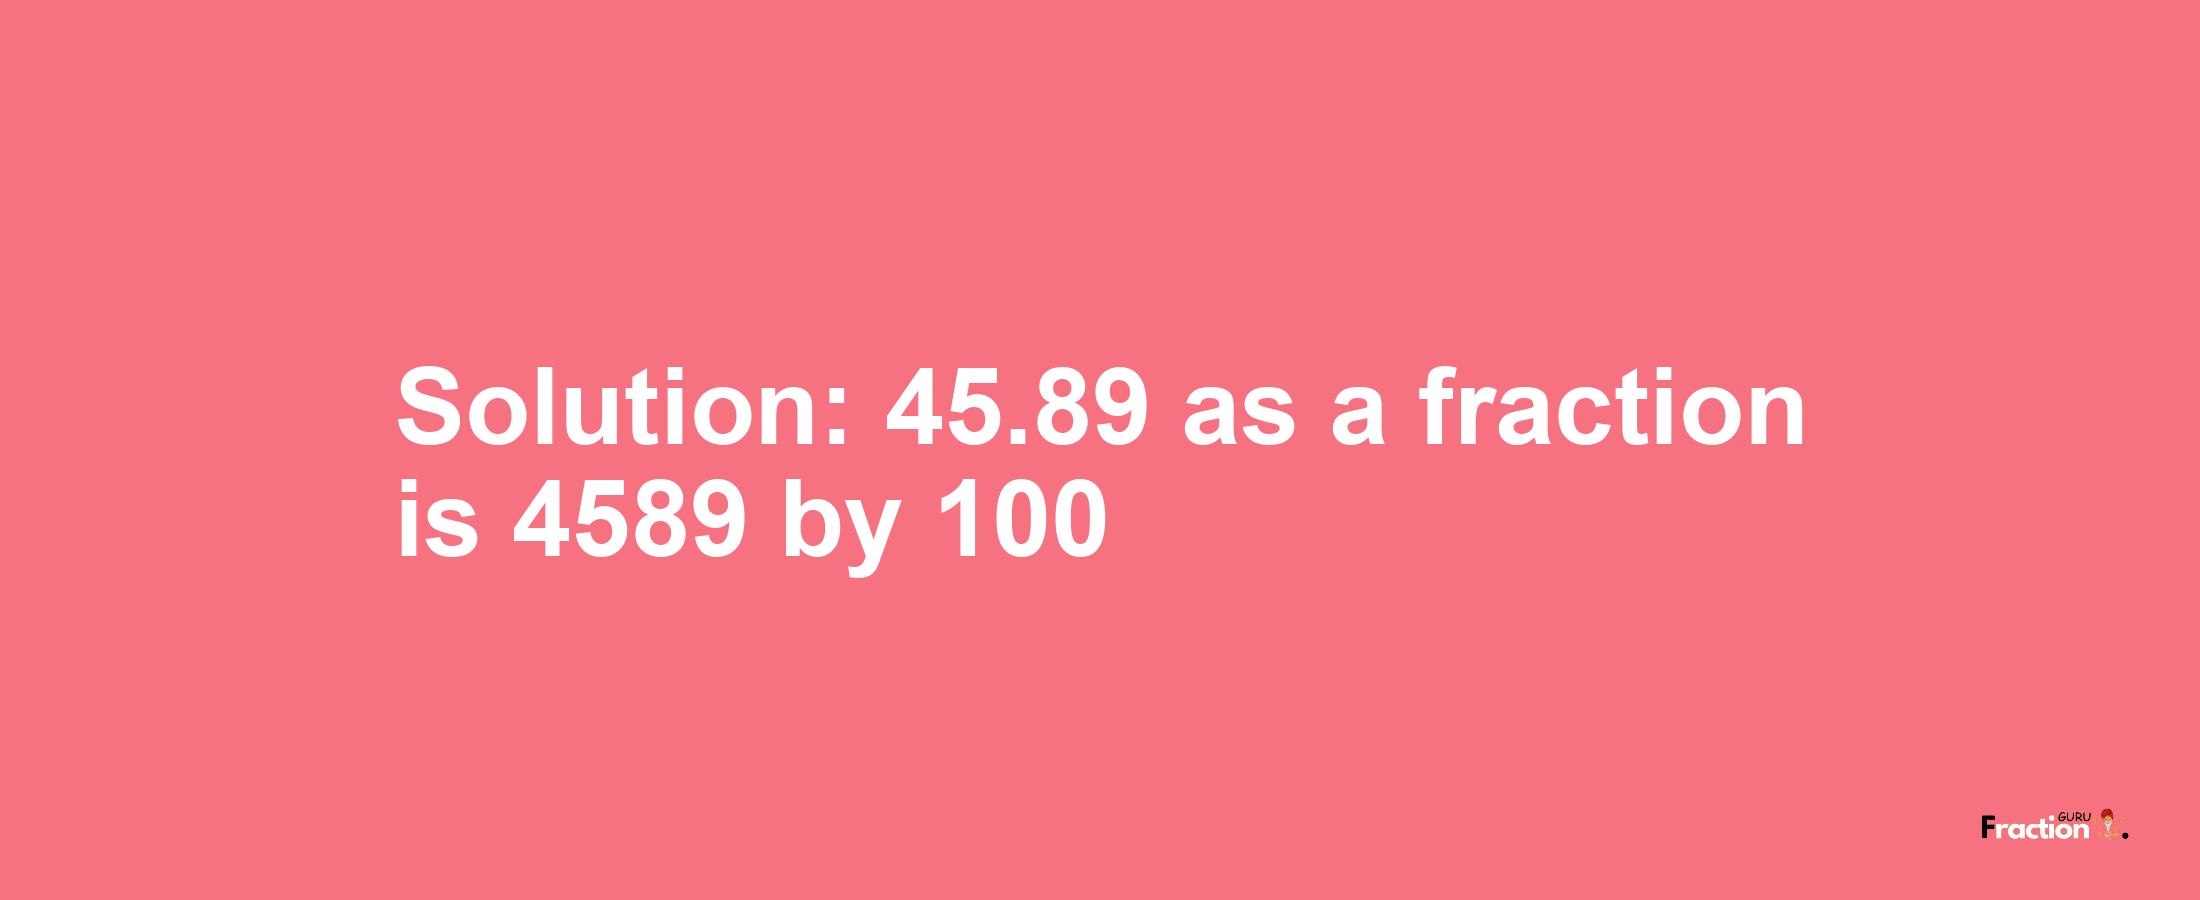 Solution:45.89 as a fraction is 4589/100